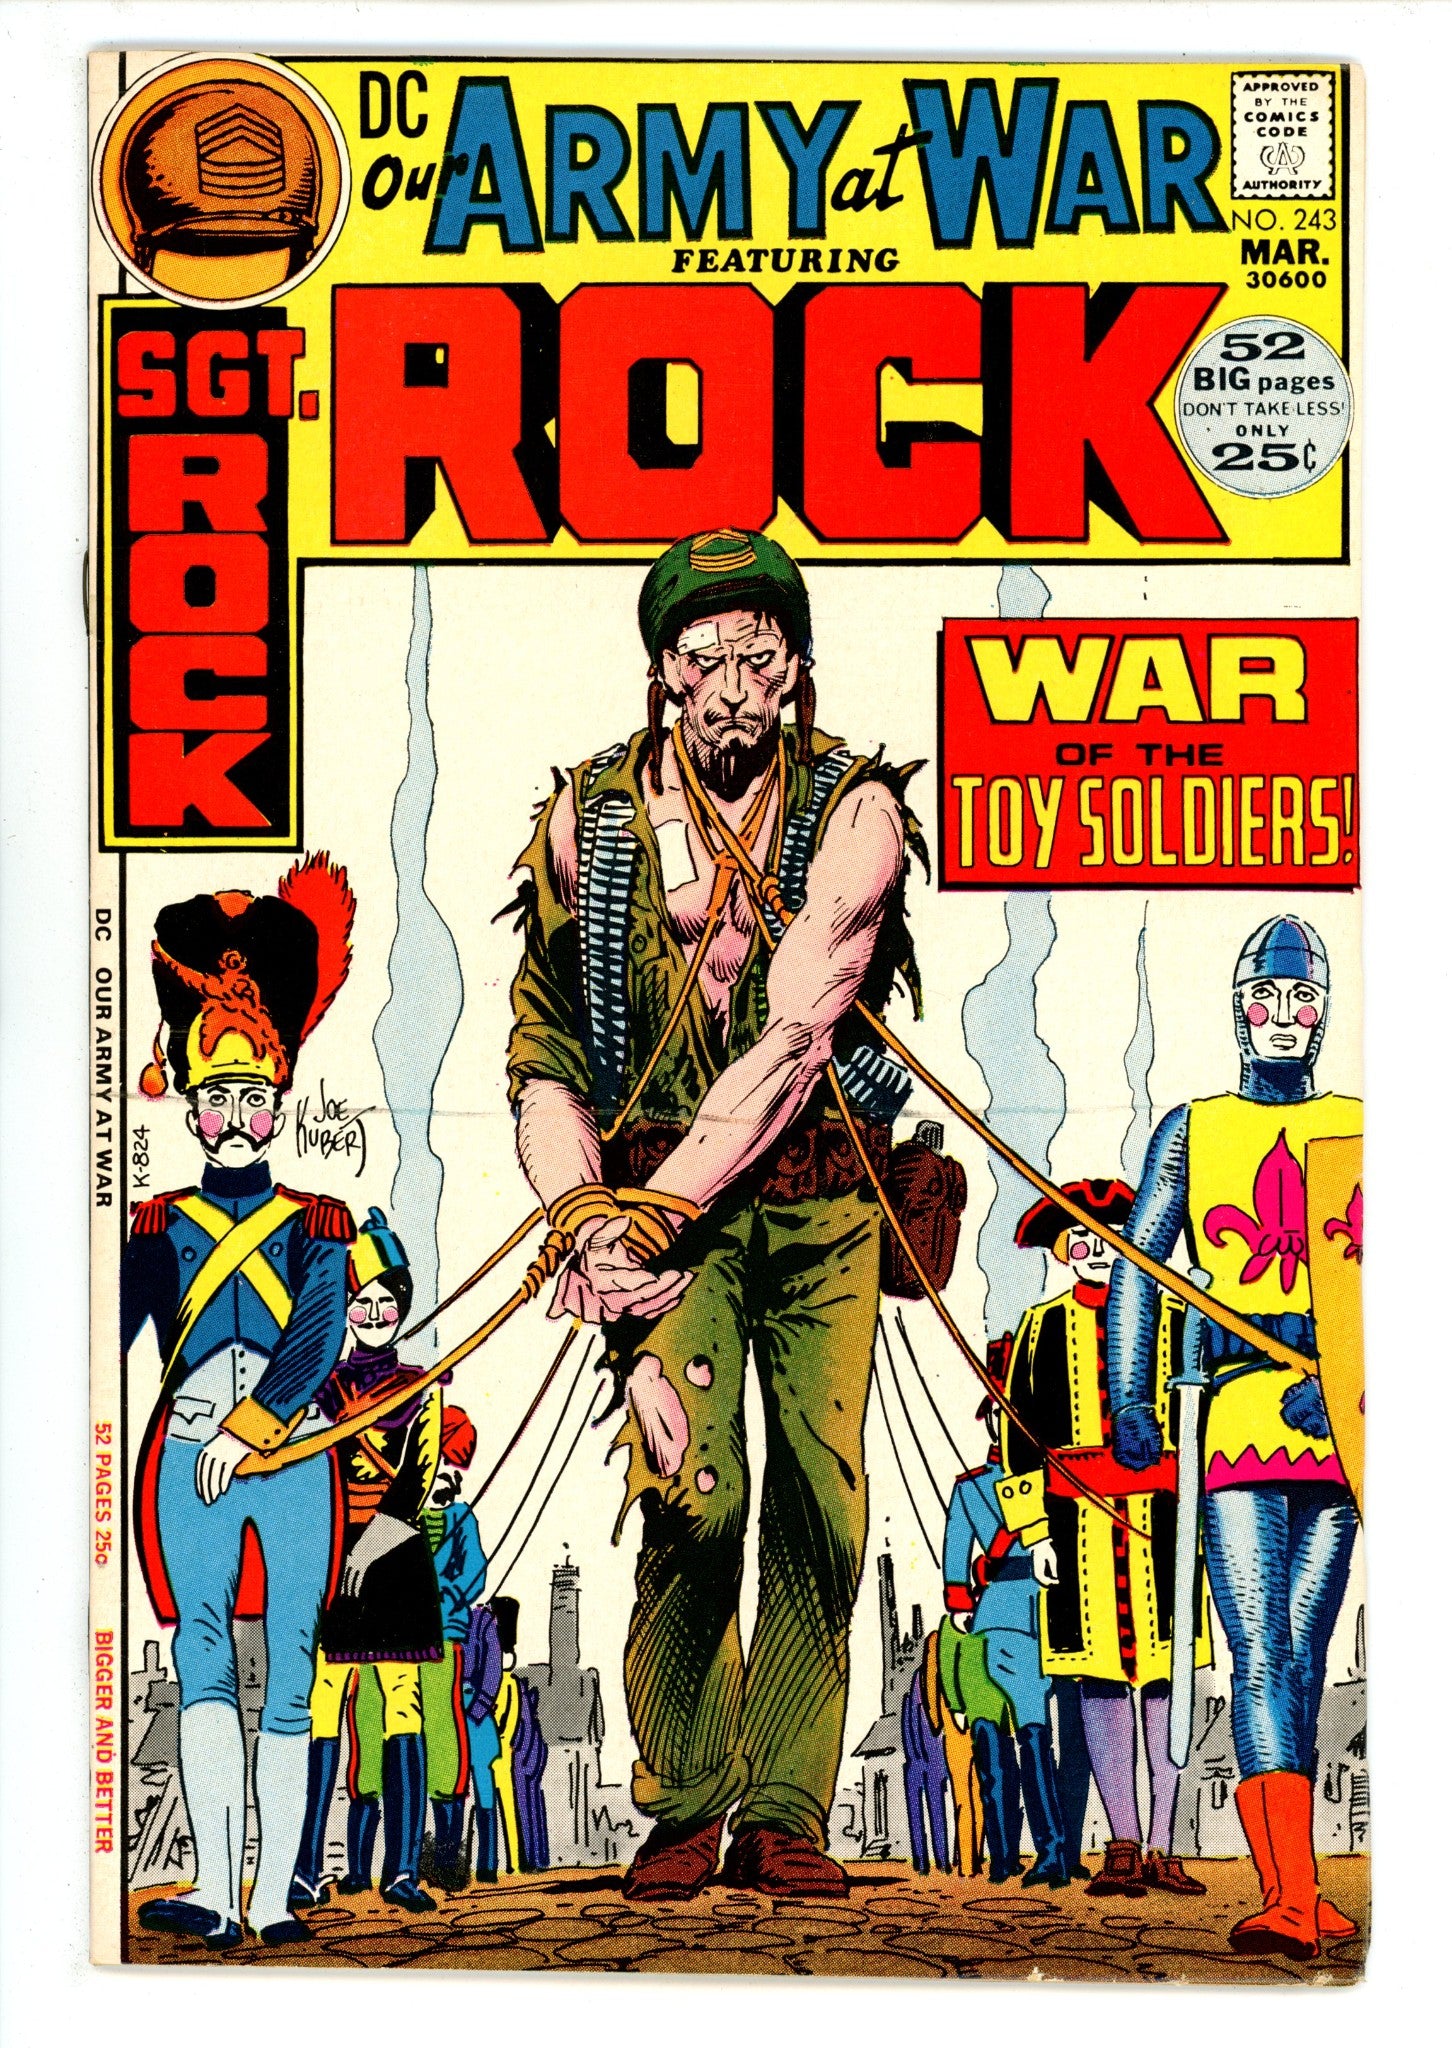 Our Army at War Vol 1 243 VF- (7.5) (1972) 